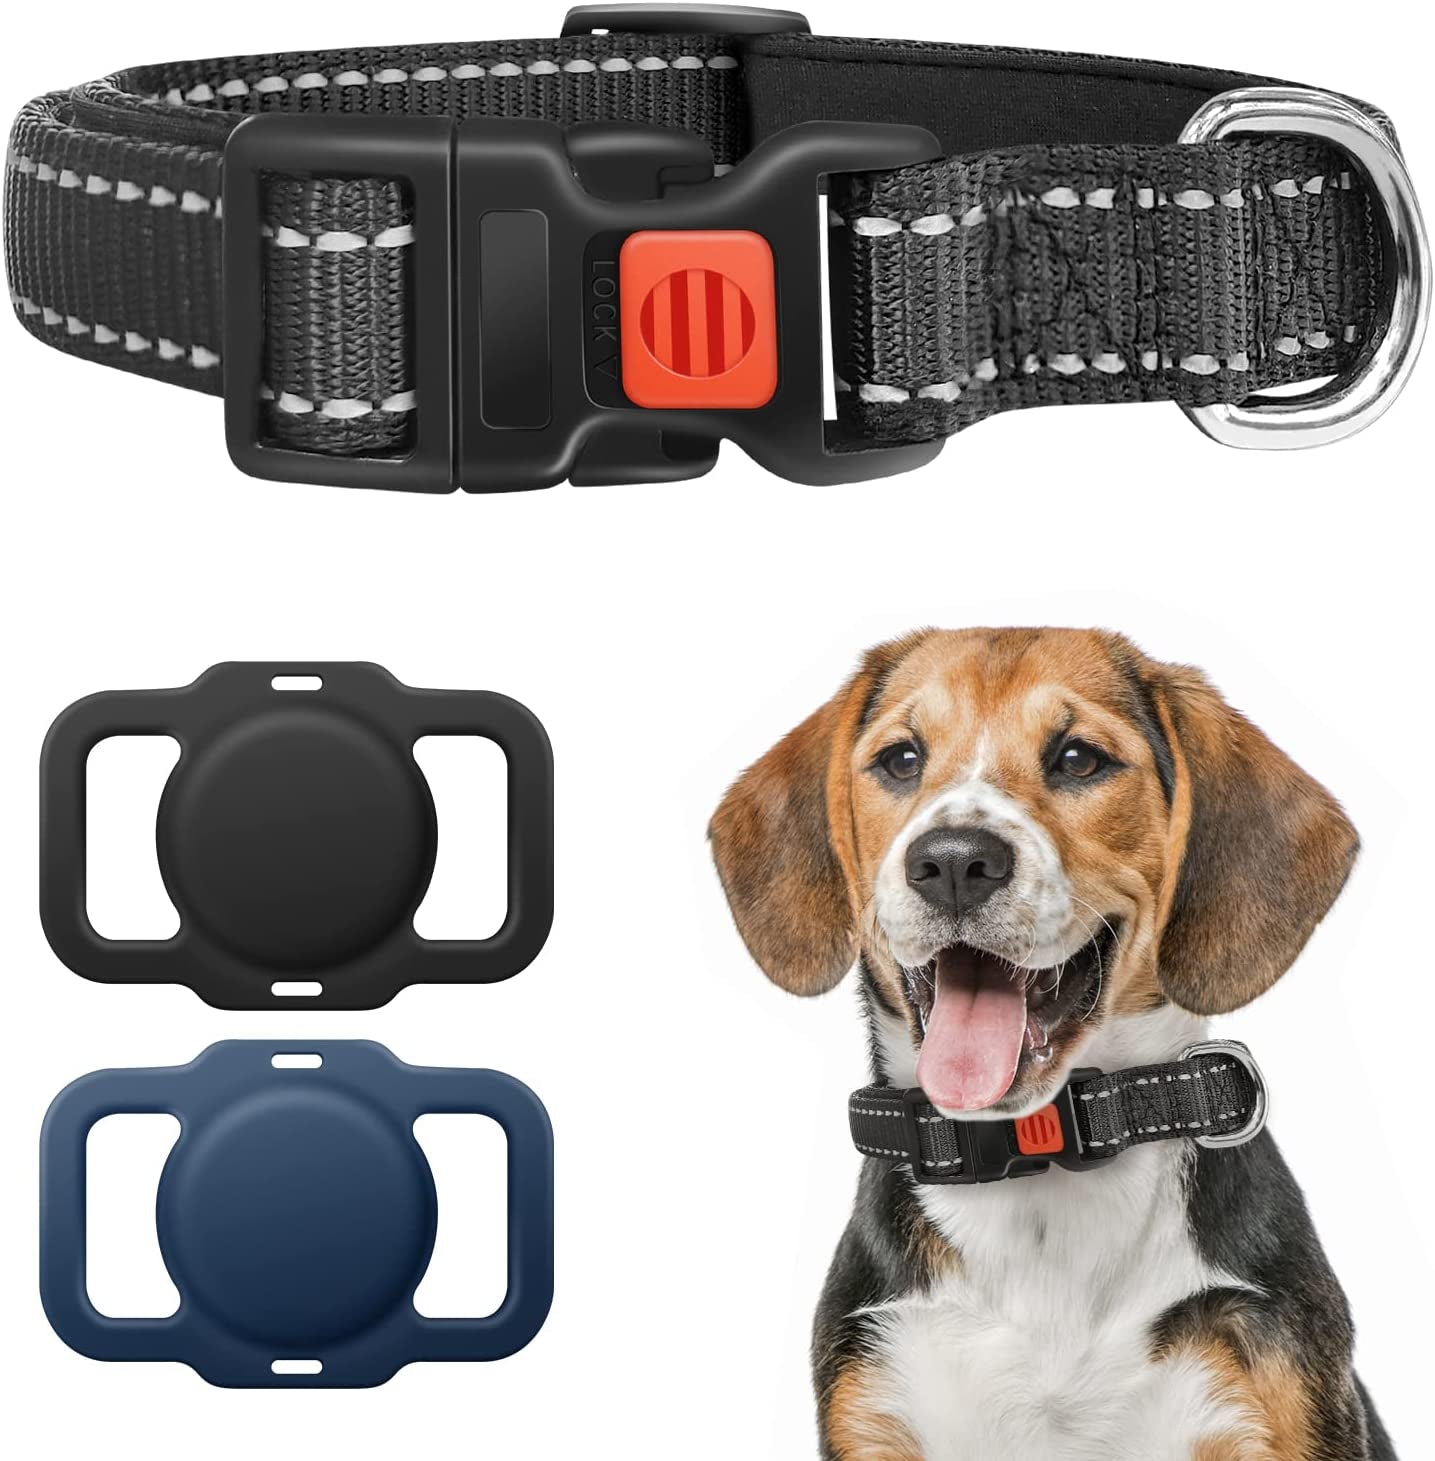 Airtag Dog Collar Holder, Protective Airtag Case for Dog Collar, Airtag Loop for GPS Dog Tracker, Dog Trackers for Apple Iphone, 2 Pack Airtag Pet, Dog Airtag Holder